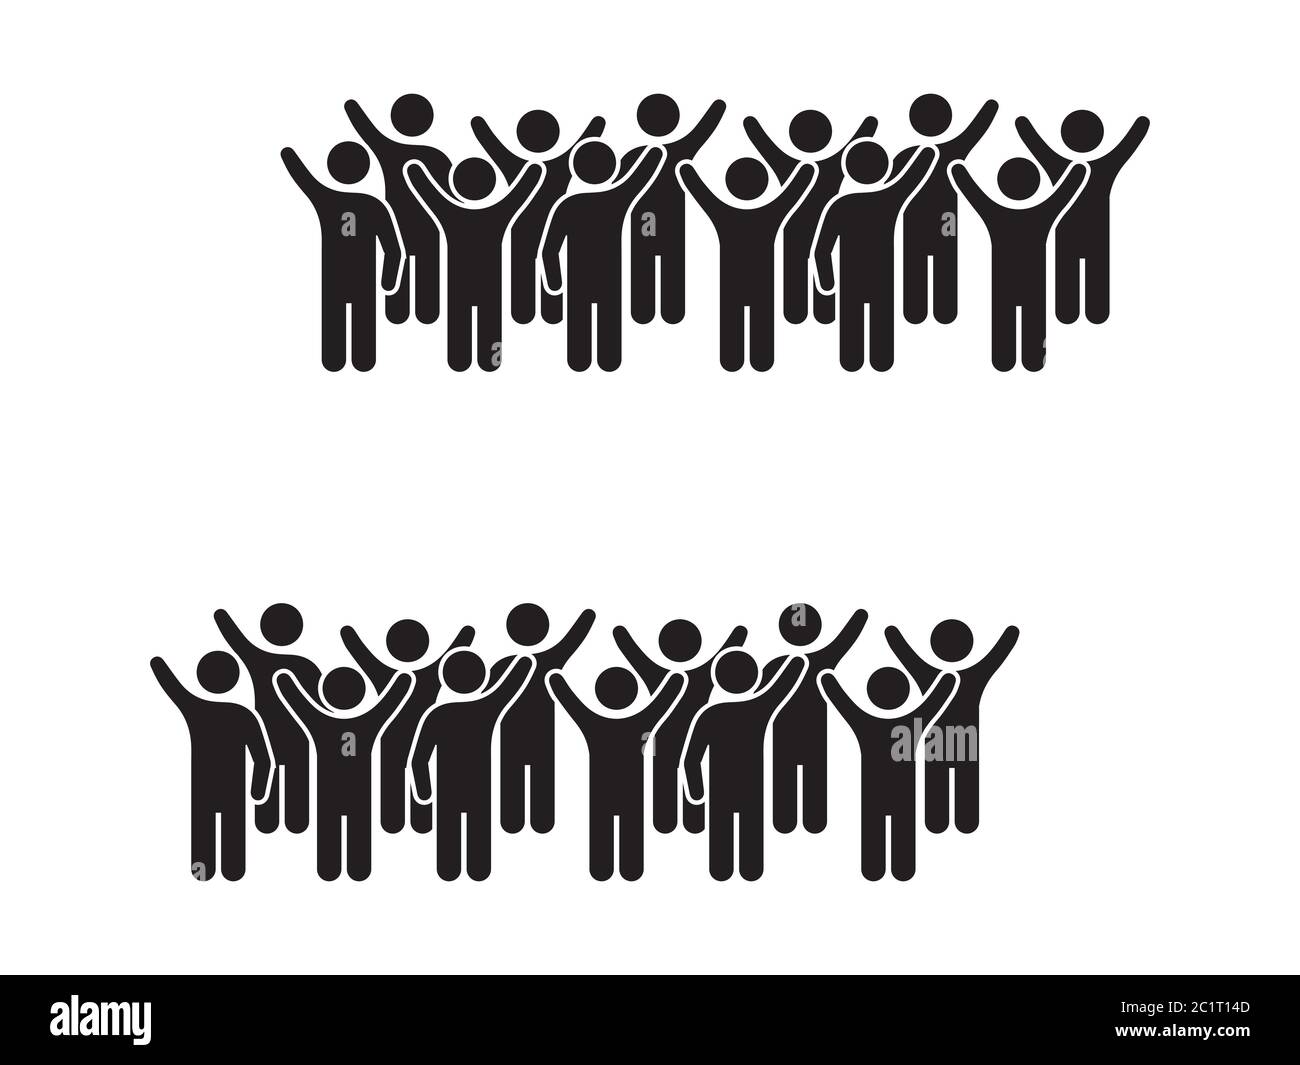 Two Groups of People Protesters Crowd. Black Illustration Isolated on a White Background. EPS Vector Stock Vector